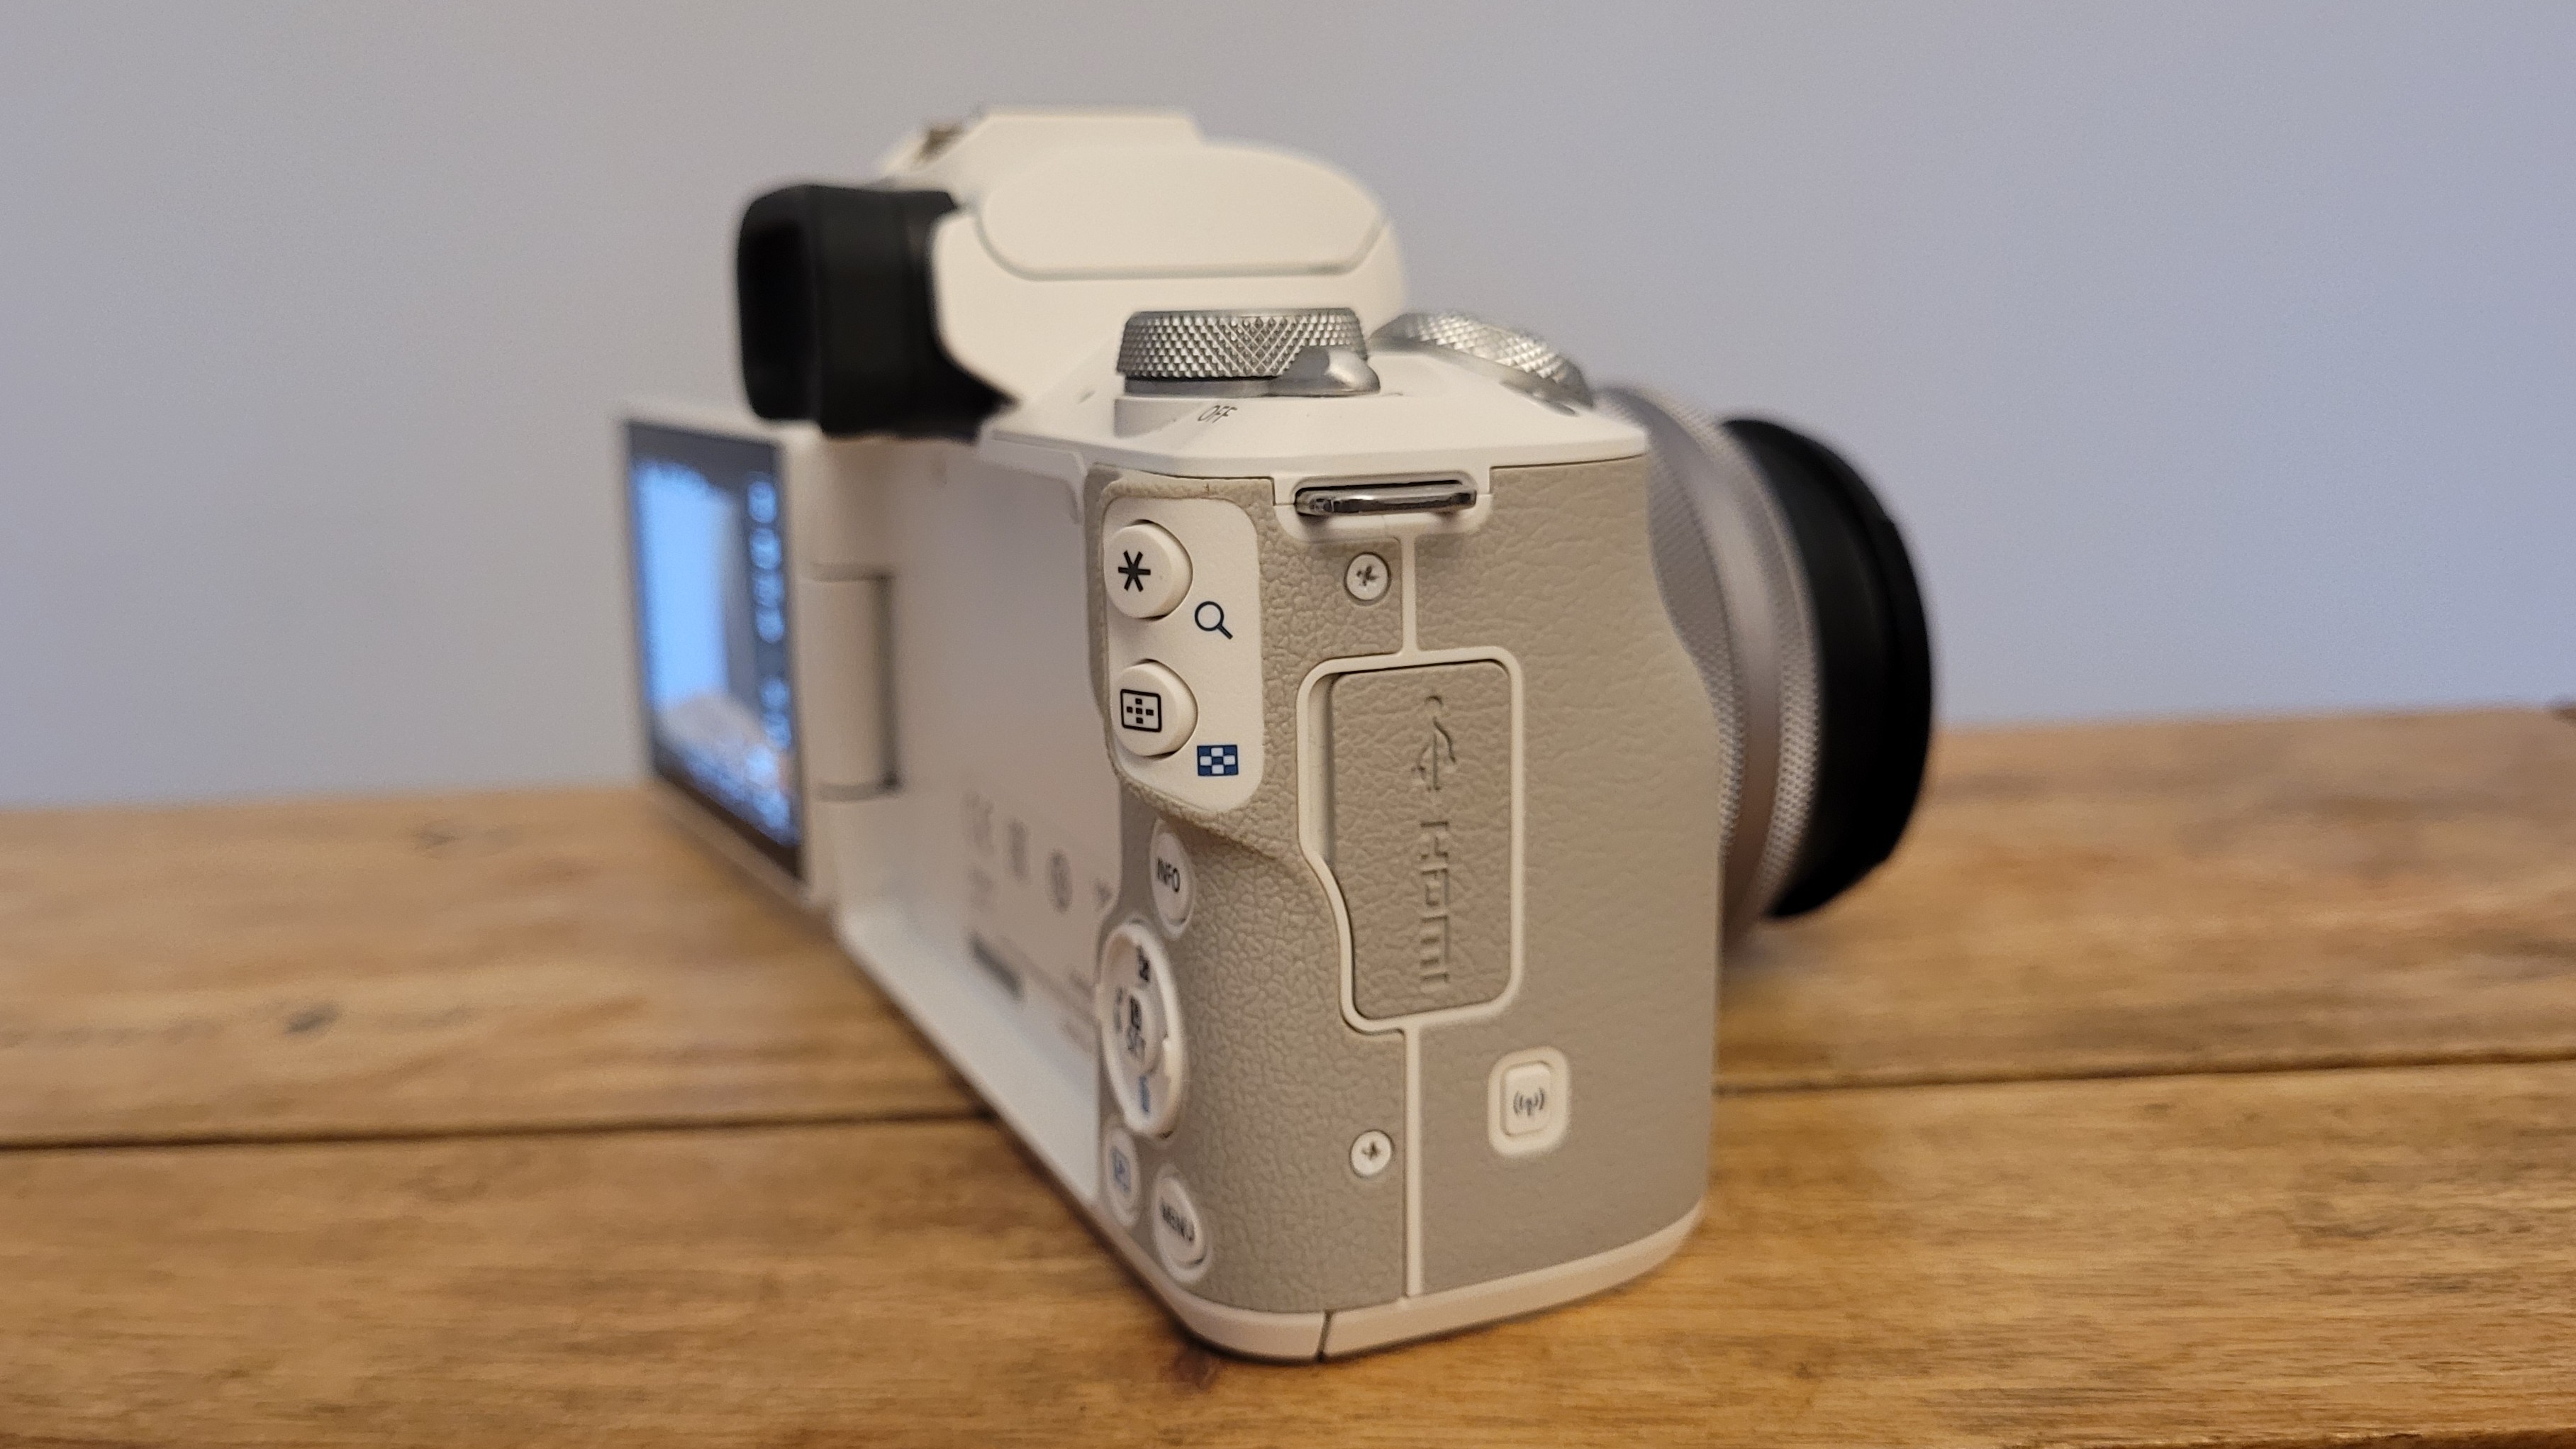 The EOS M50 Mark II has a generous grip, although the buttons on the back are a little too close for our liking.